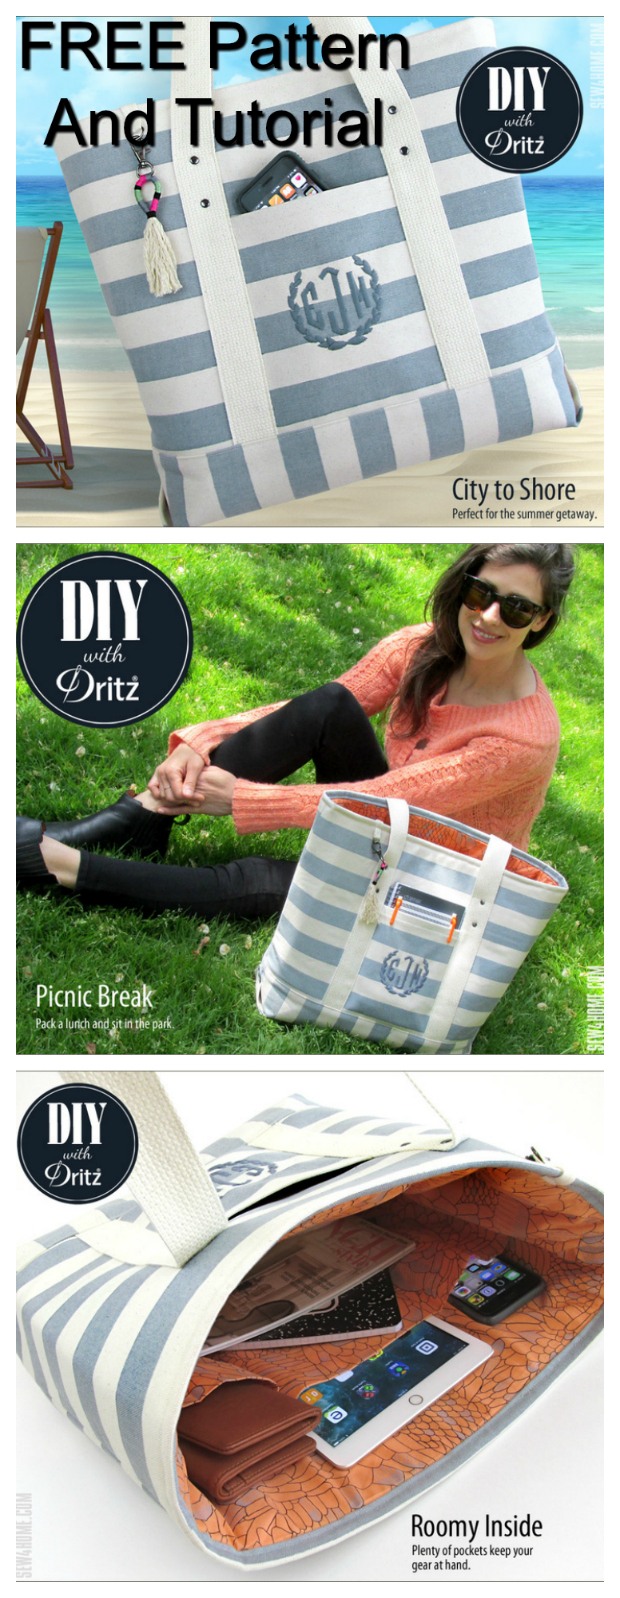 If you want to make yourself an awesome summer bag then you should download this FREE pdf pattern for the Super Sturdy Summer Tote.